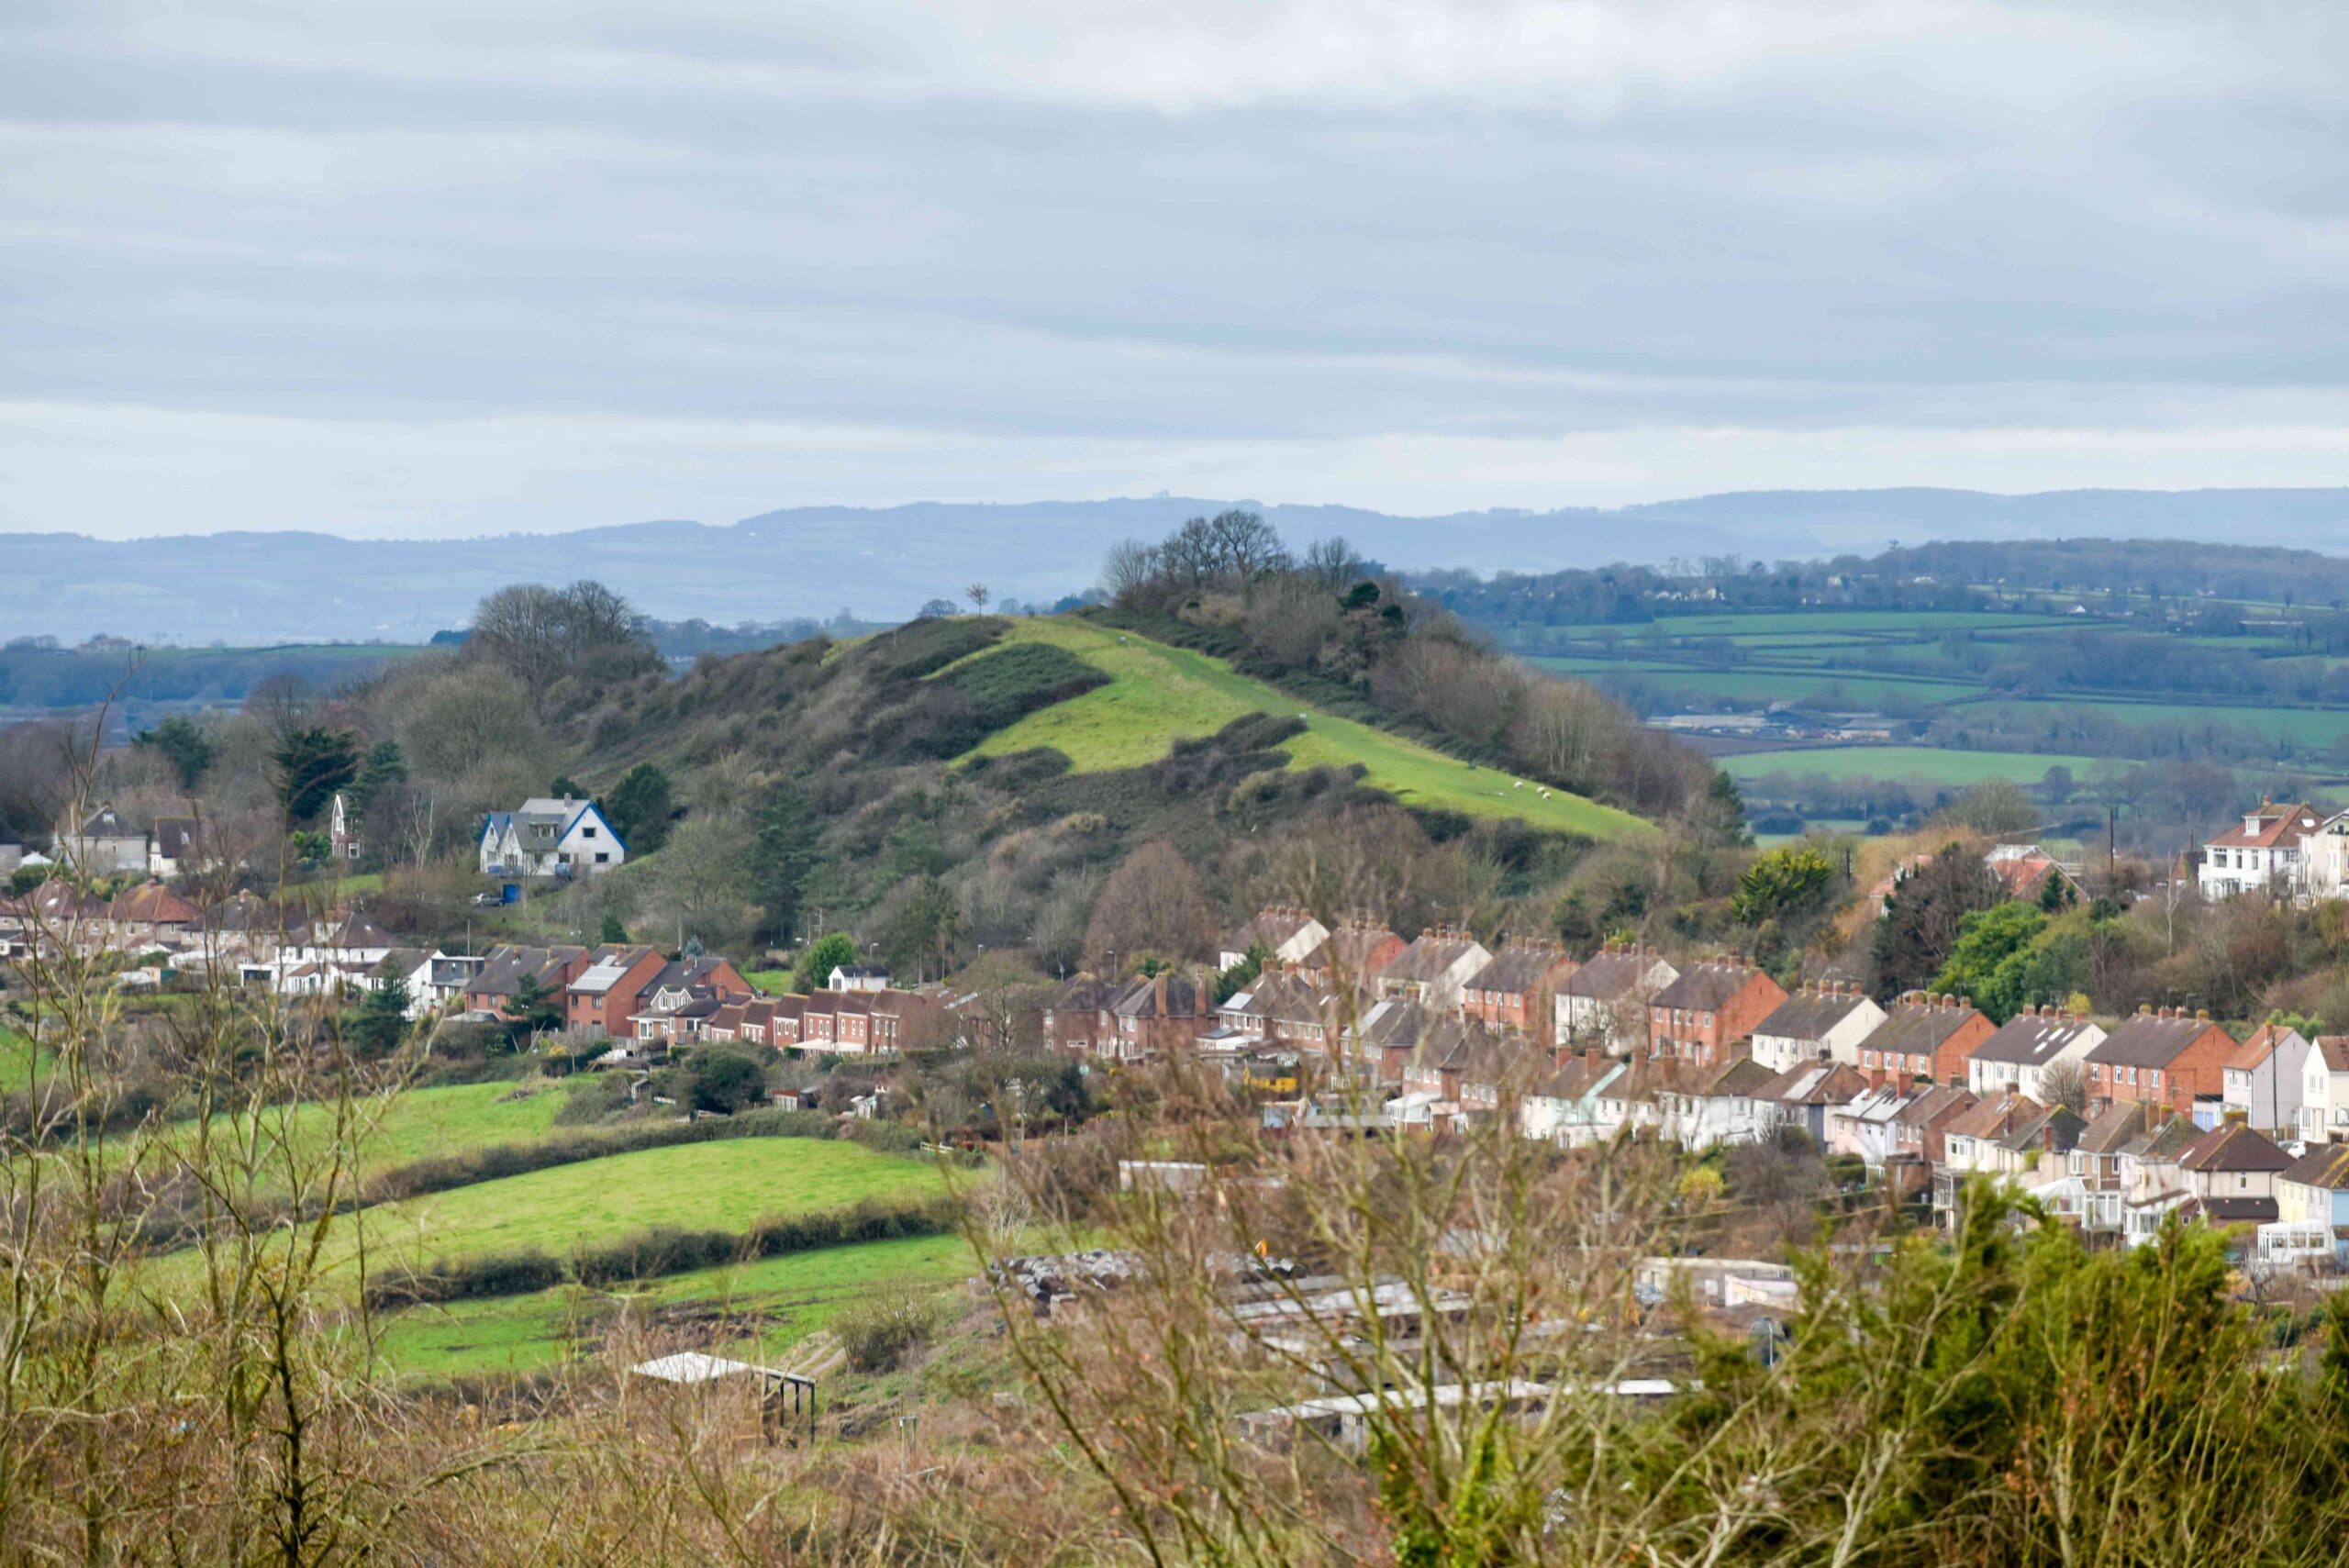 High angle view of scenery with small english town or village in the countryside with hills and fields